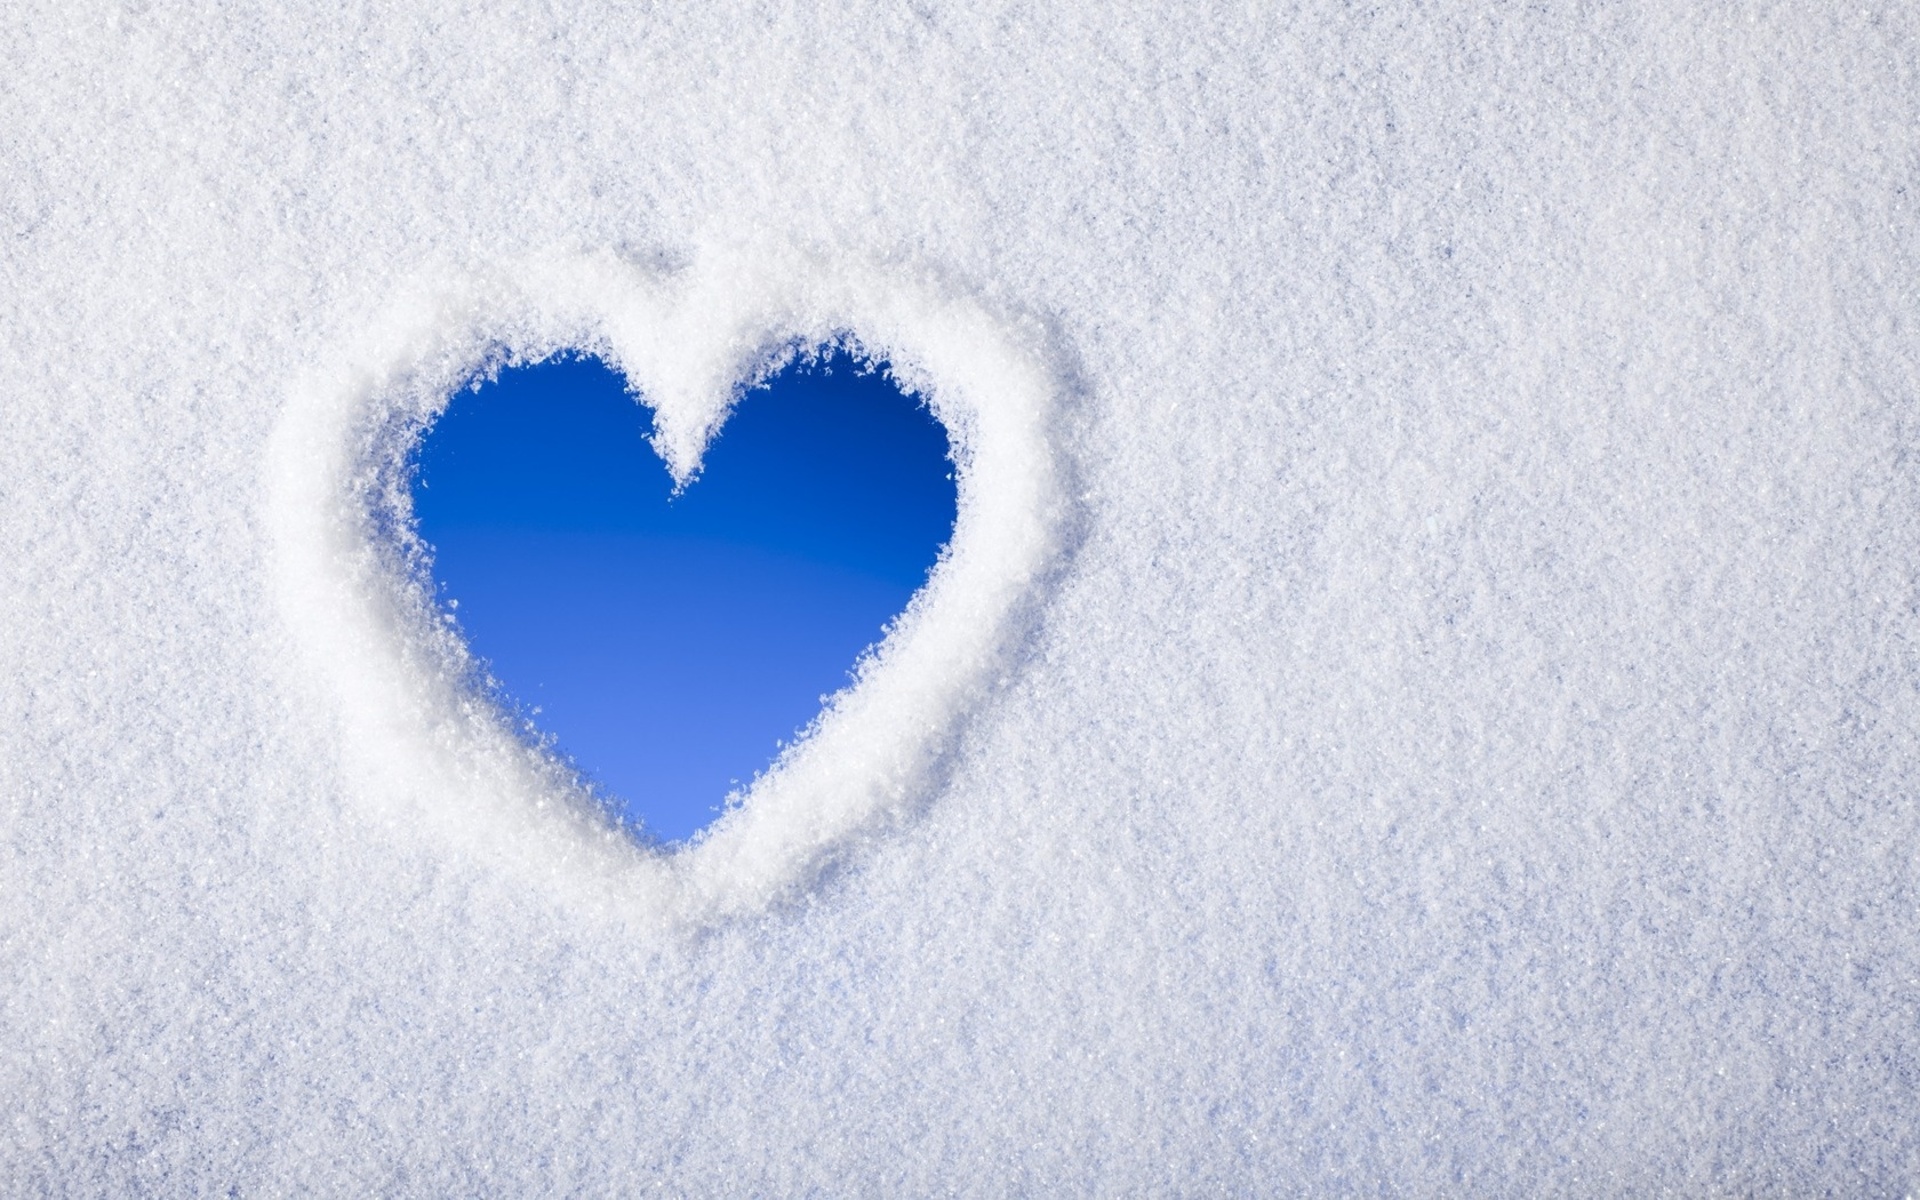 Snow Heart Wallpapers | HD Wallpapers | ID #14307